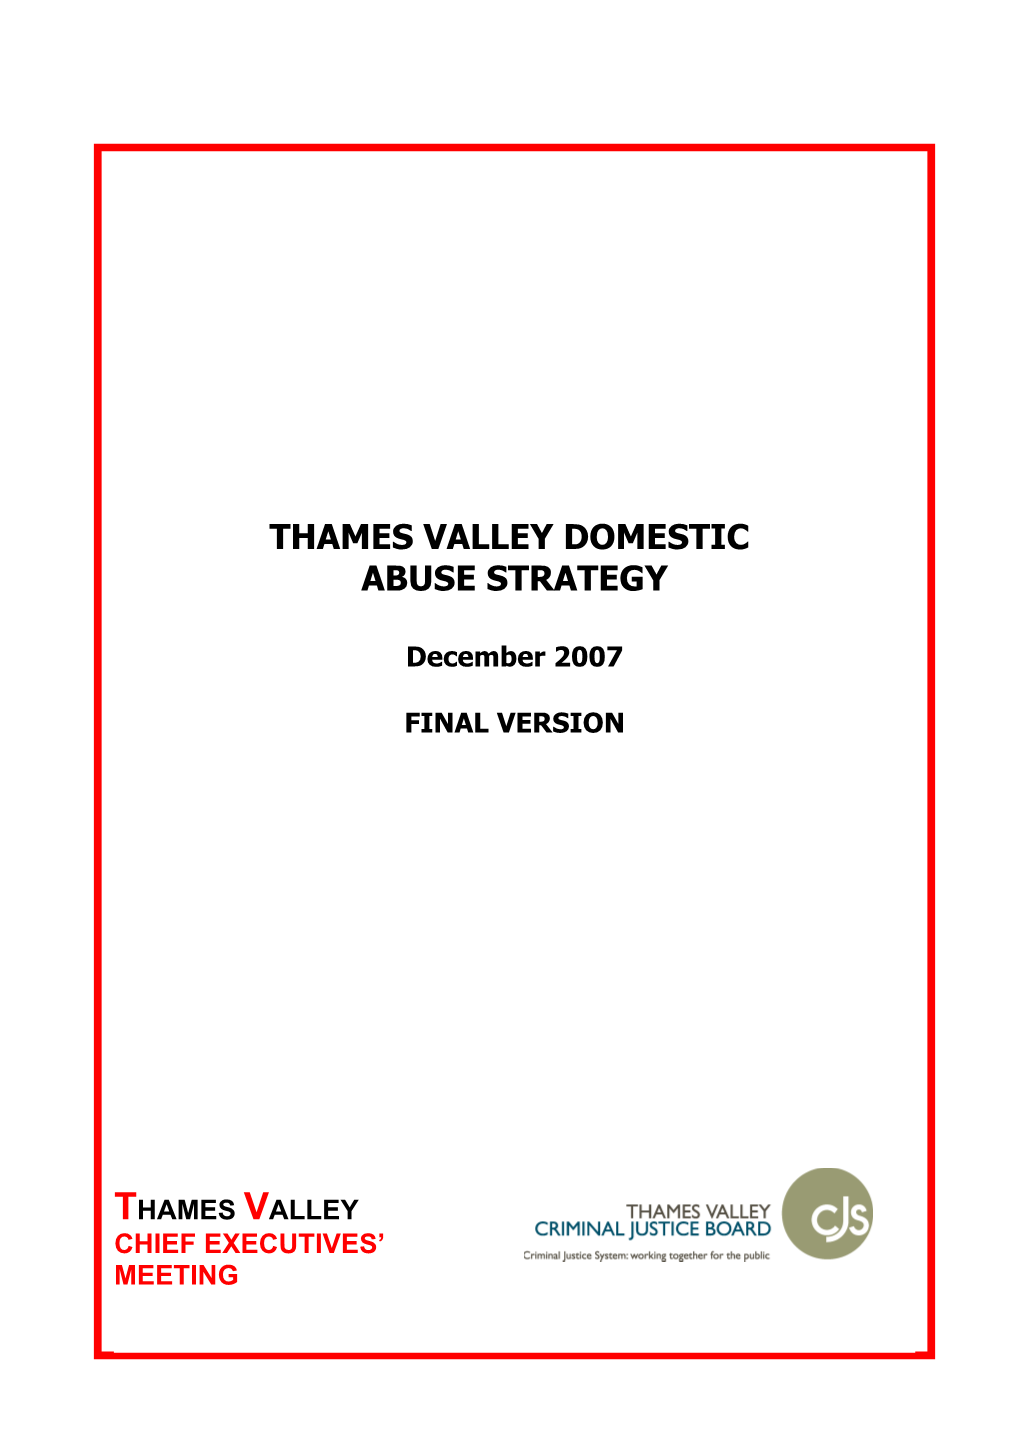 The Thames Valley Domestic Violence Strategy Has Been Developed and Agreed by the Thames